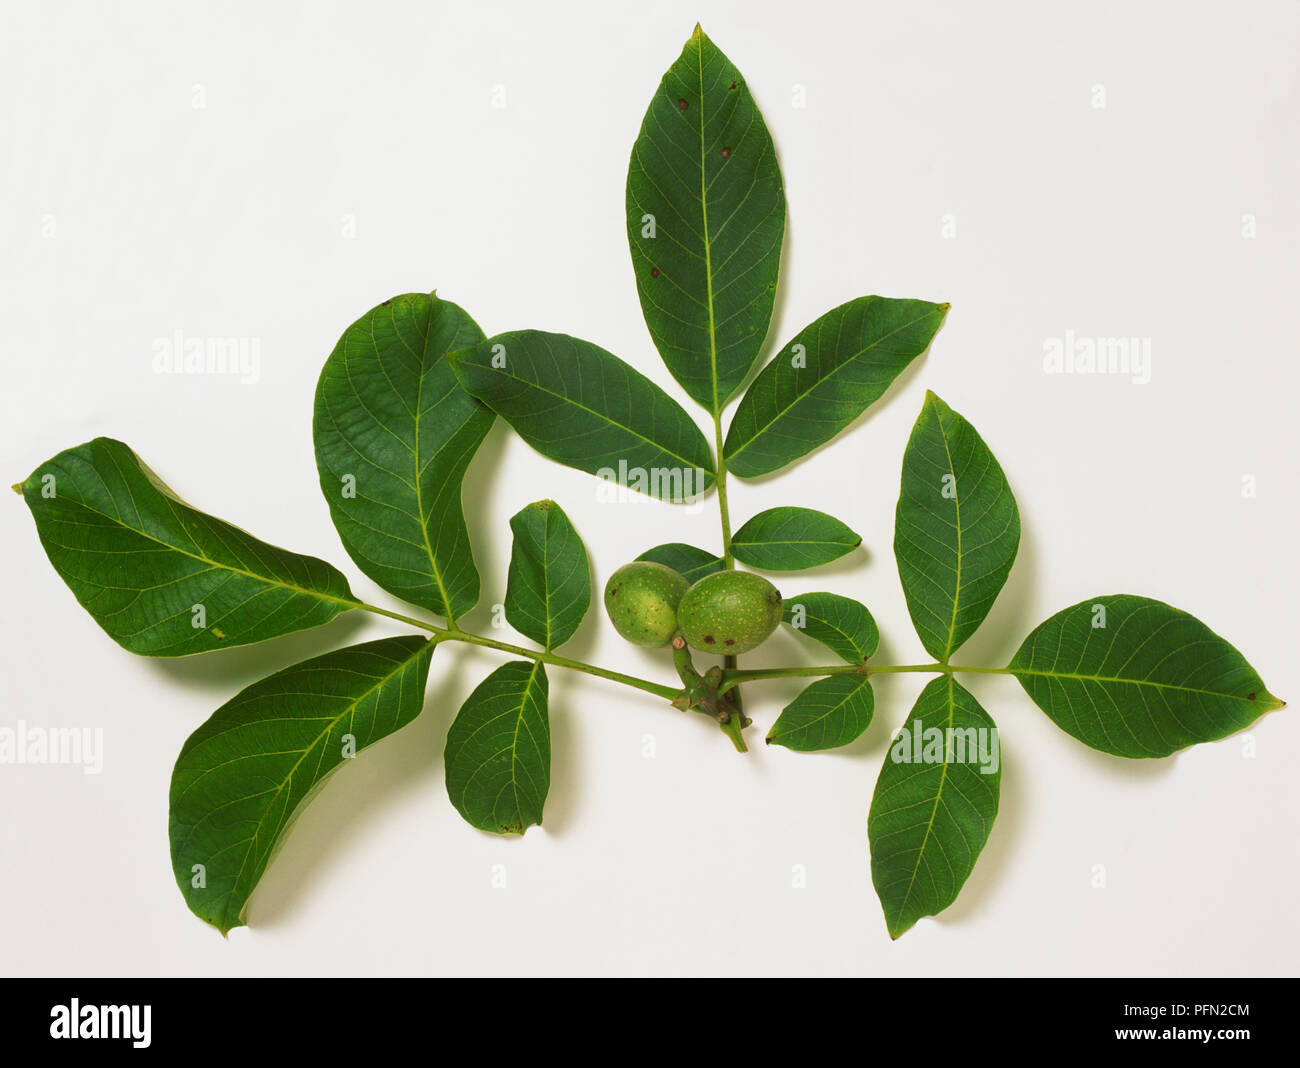 Juglans regia, leaves and fruit from the English Walnut tree. Stock Photo